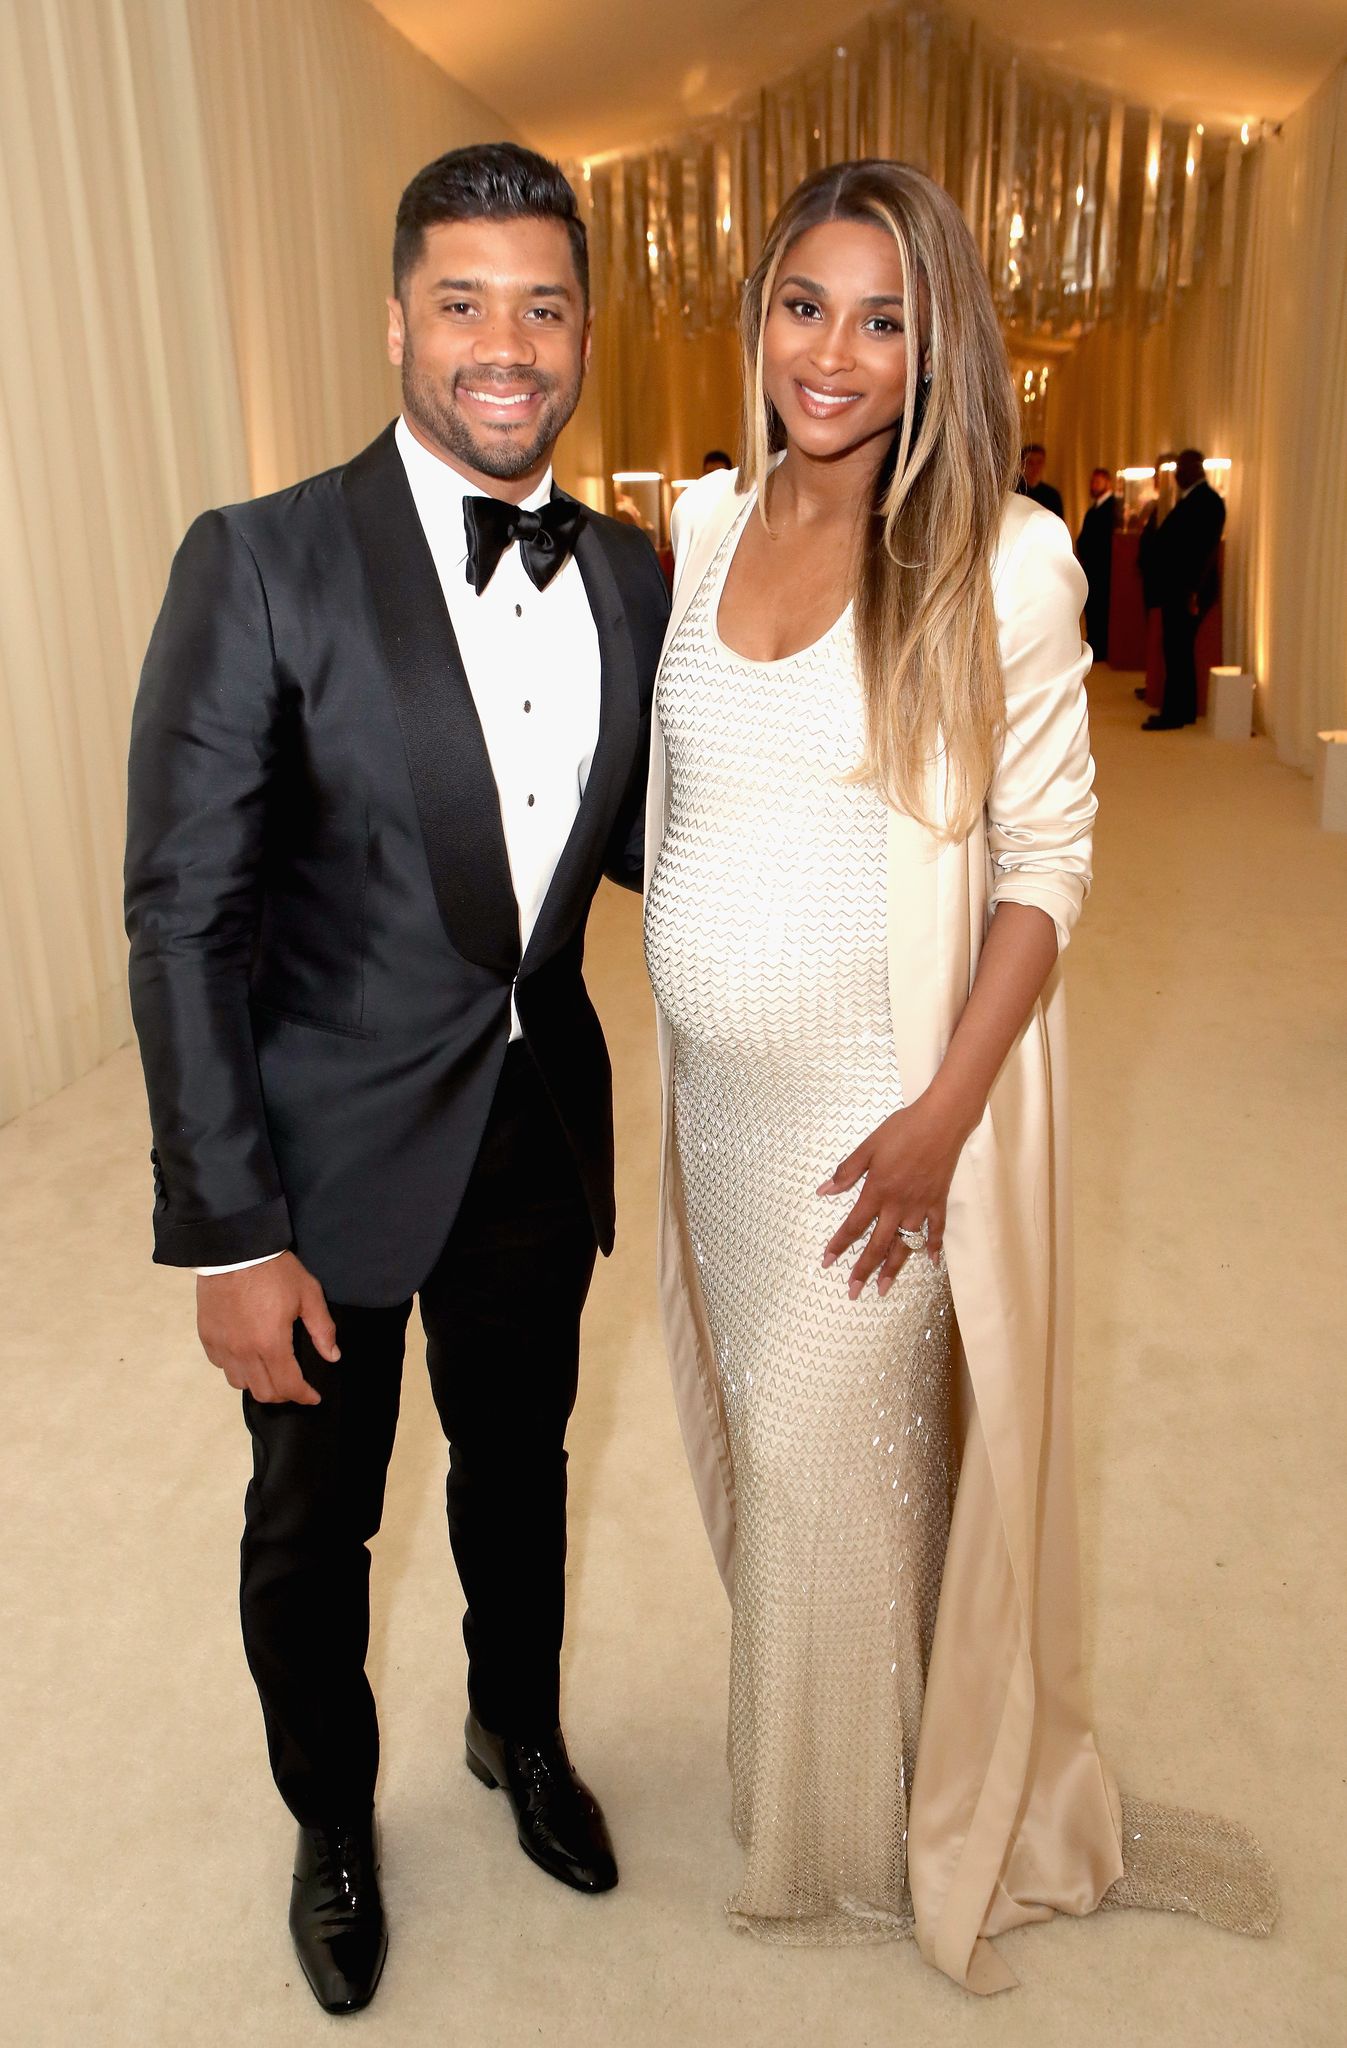 Russell Wilson and Ciara at the 25th Annual Elton John AIDS Foundation's Academy Awards Viewing Party in West Hollywood, Feb. 27, 2017 | Photo: Getty Images